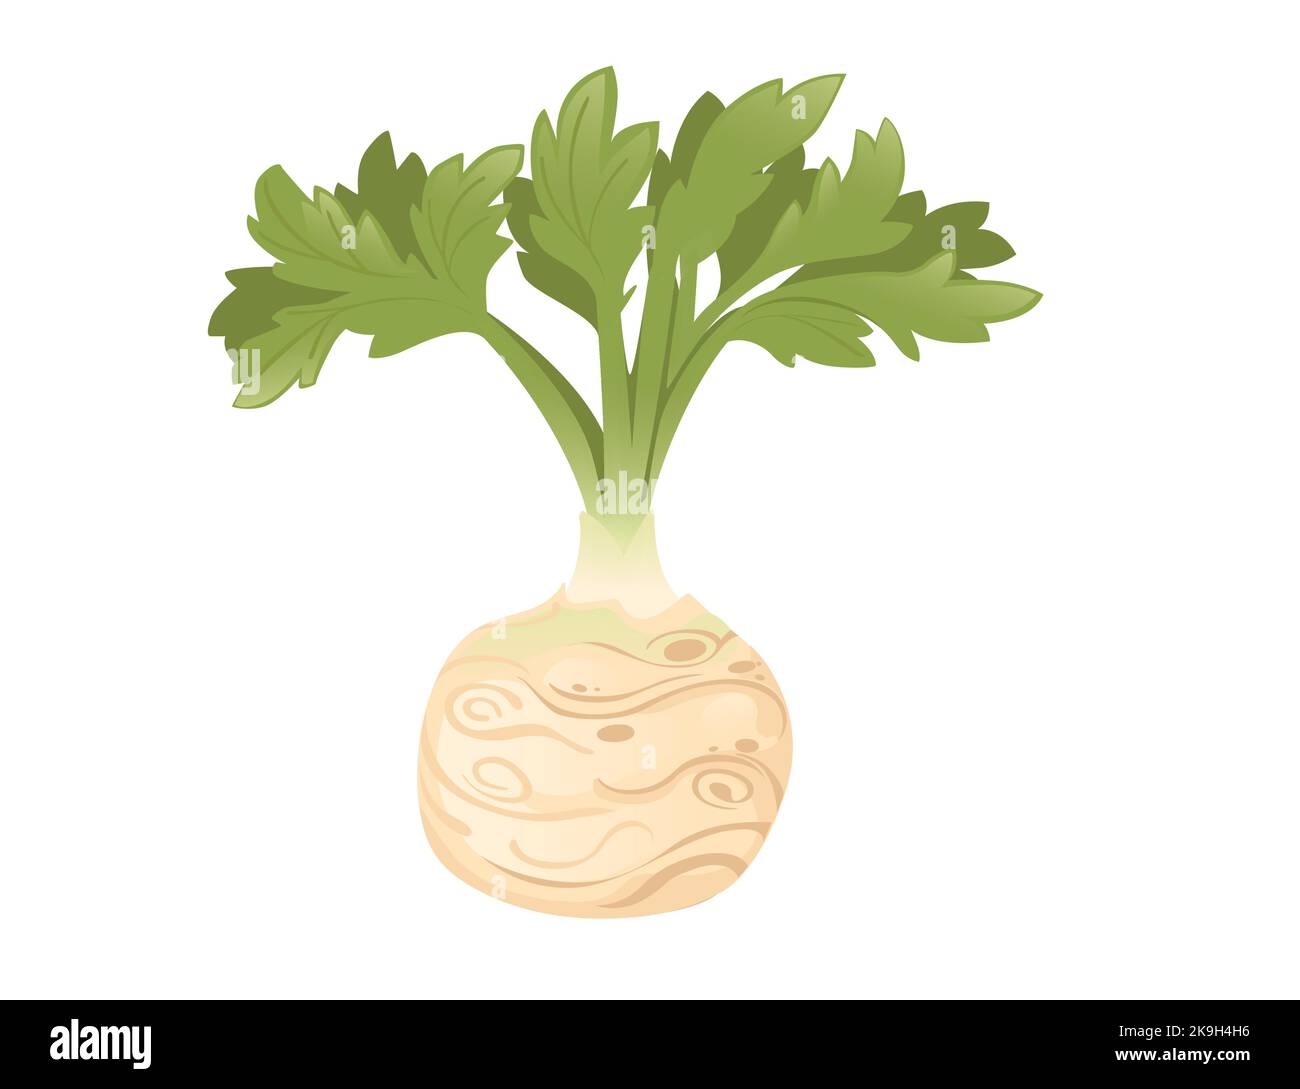 Celery root with green stem cartoon vegetable plant vector illustration isolated on white background Stock Vector